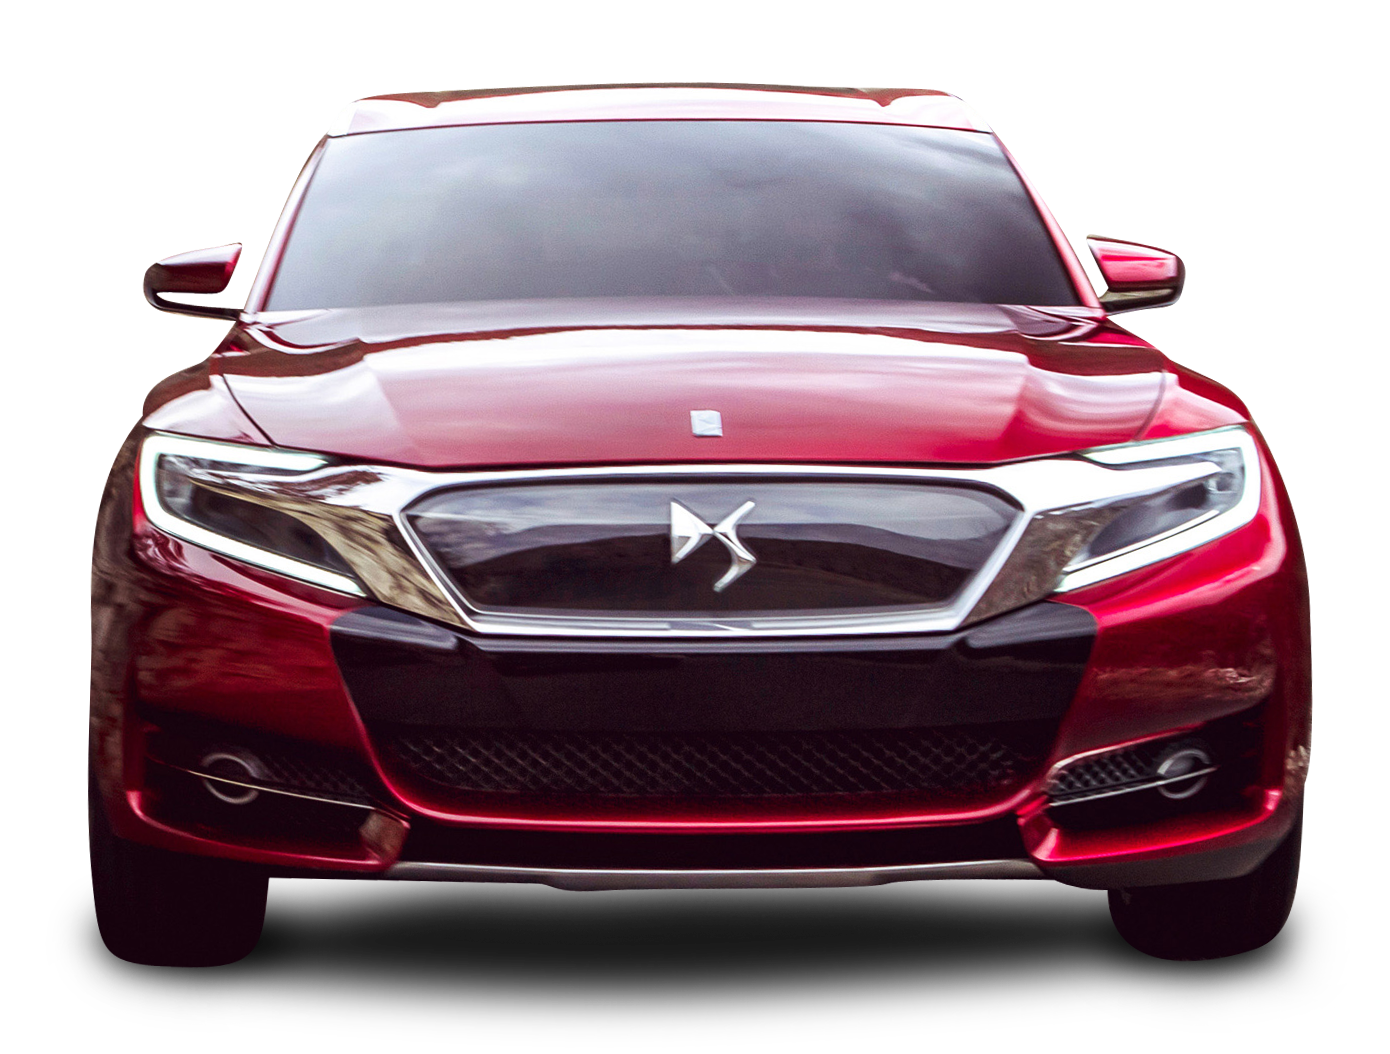 Red Citroen DS Wild Rubis Front View Car PNG Image.